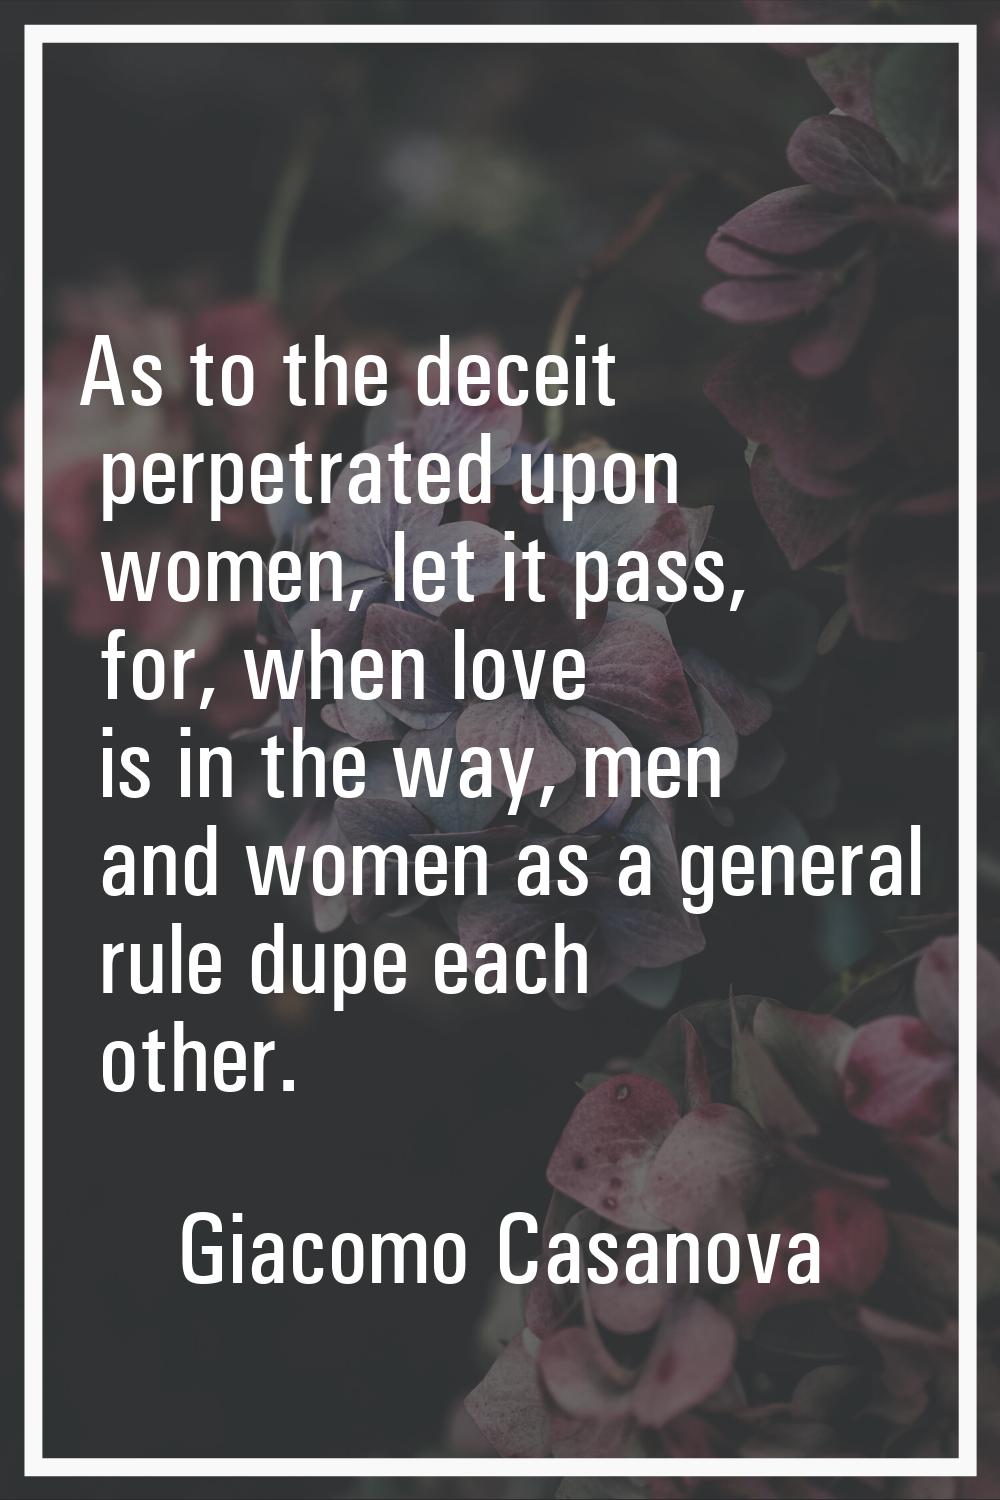 As to the deceit perpetrated upon women, let it pass, for, when love is in the way, men and women a